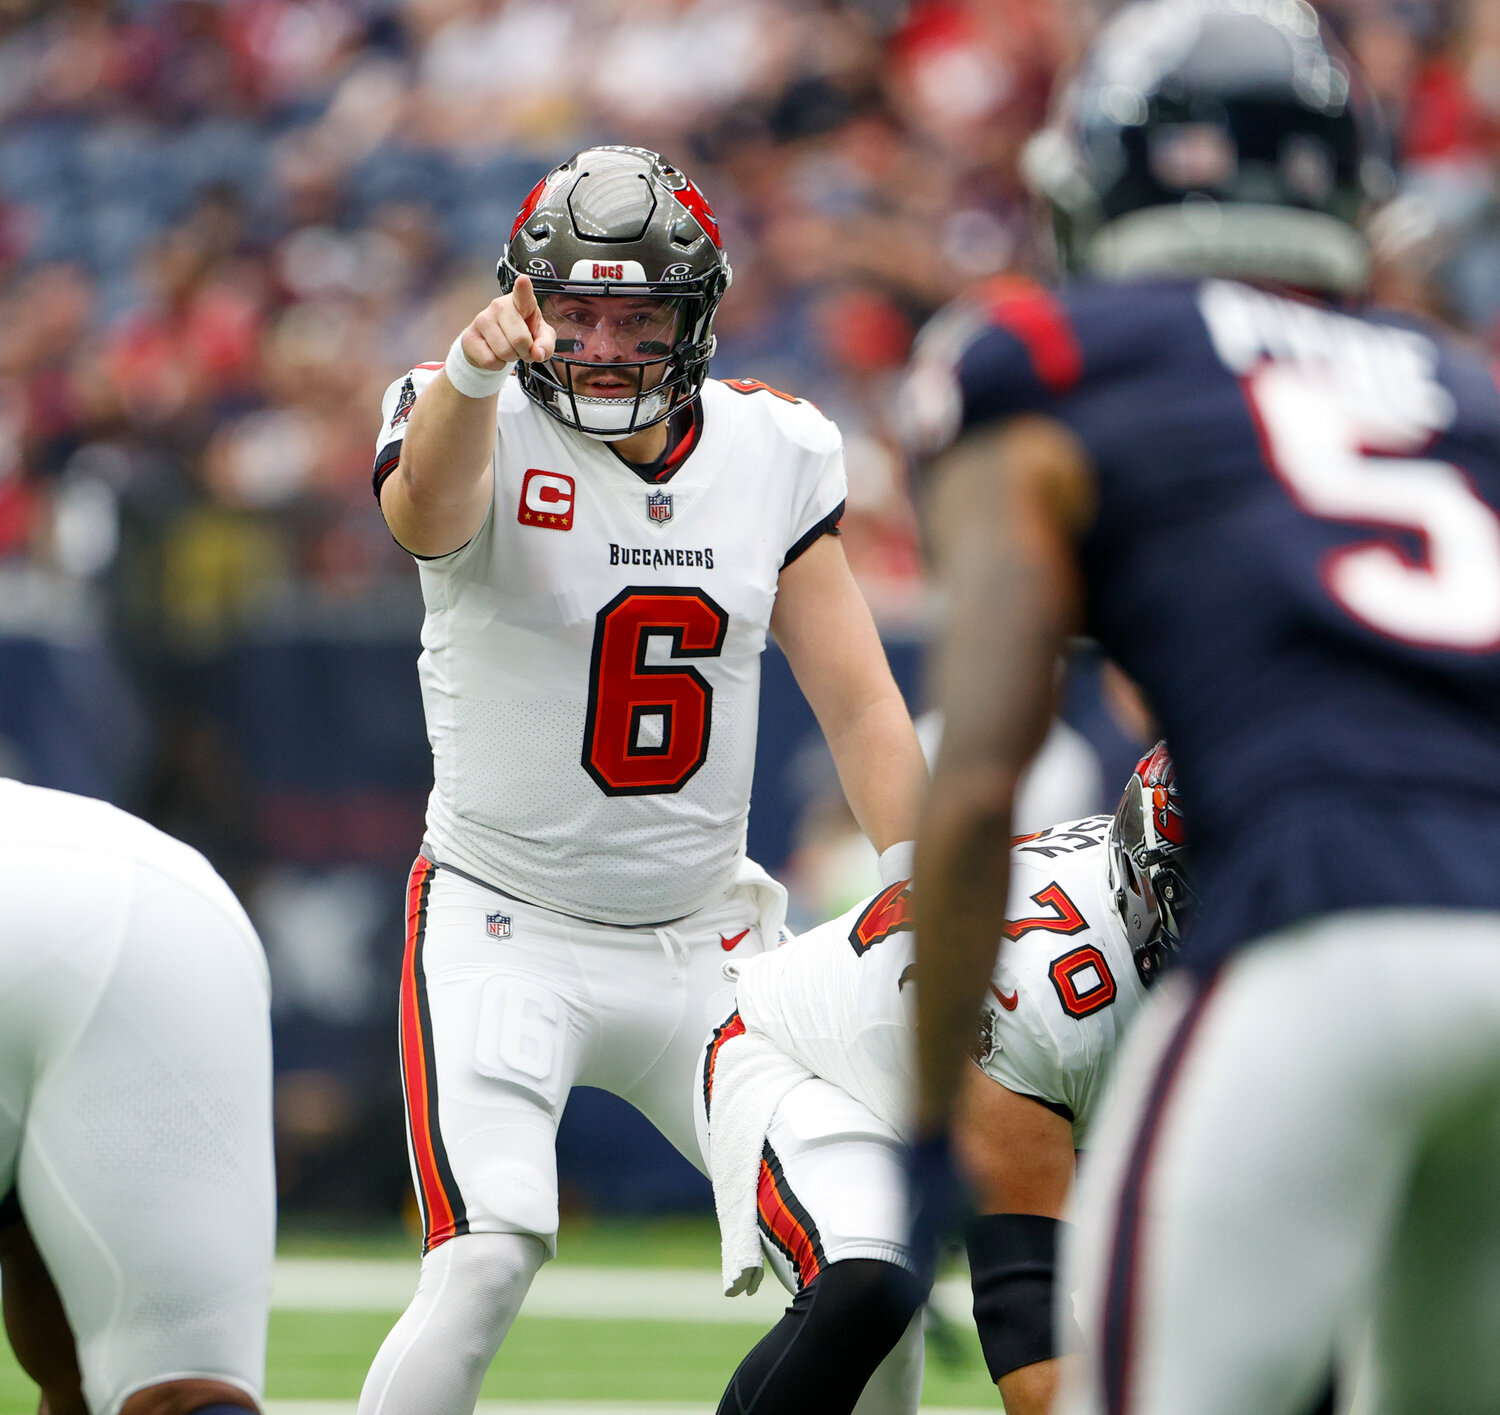 Buccaneers quarterback Baker Mayfield (6) points to Texans safety Jalen Pitre (5) before a snap during an NFL game between the Houston Texans and the Tampa Bay Buccaneers on November 5, 2023 in Houston.